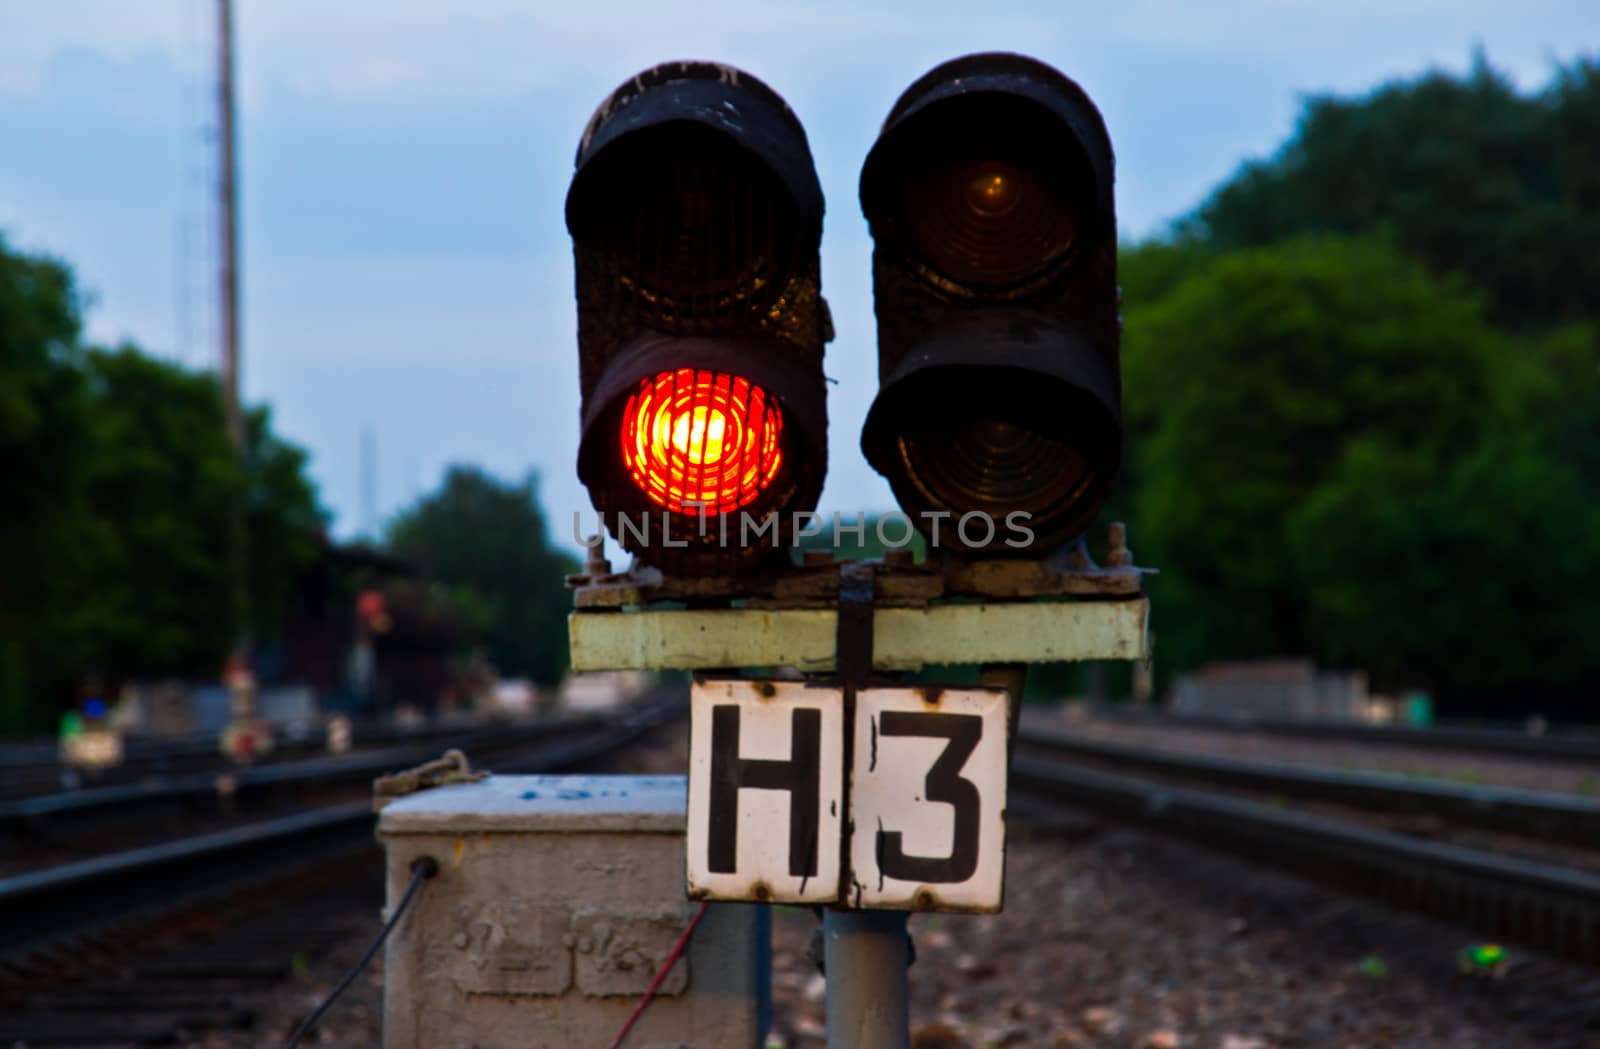 Railway traffic light on the background of green trees